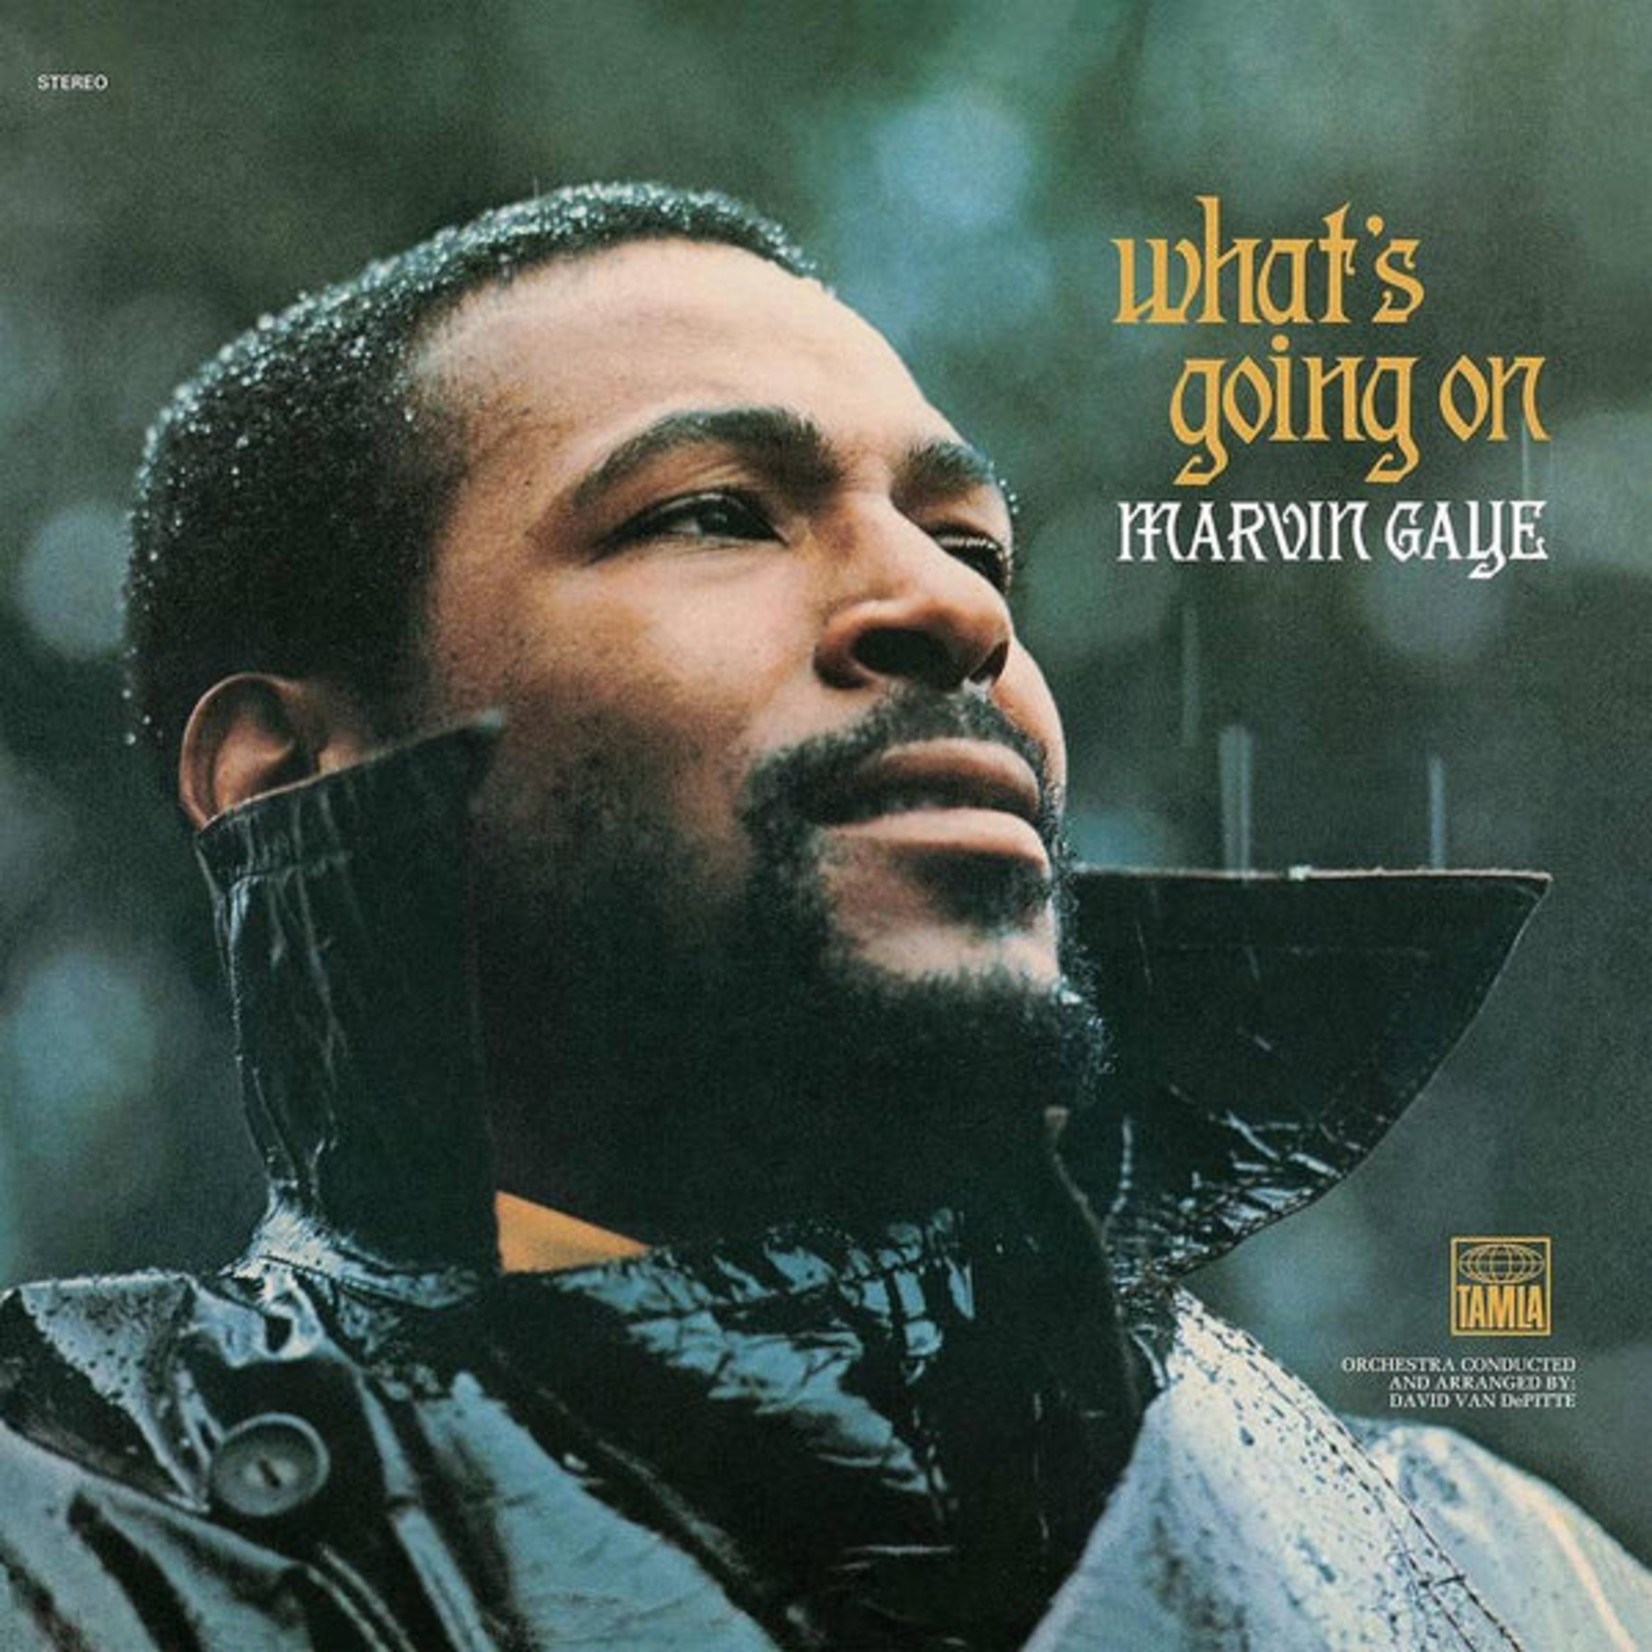 Marvin Gaye - What's Going On (2LP/180g/gatefold) 50th Anniversary